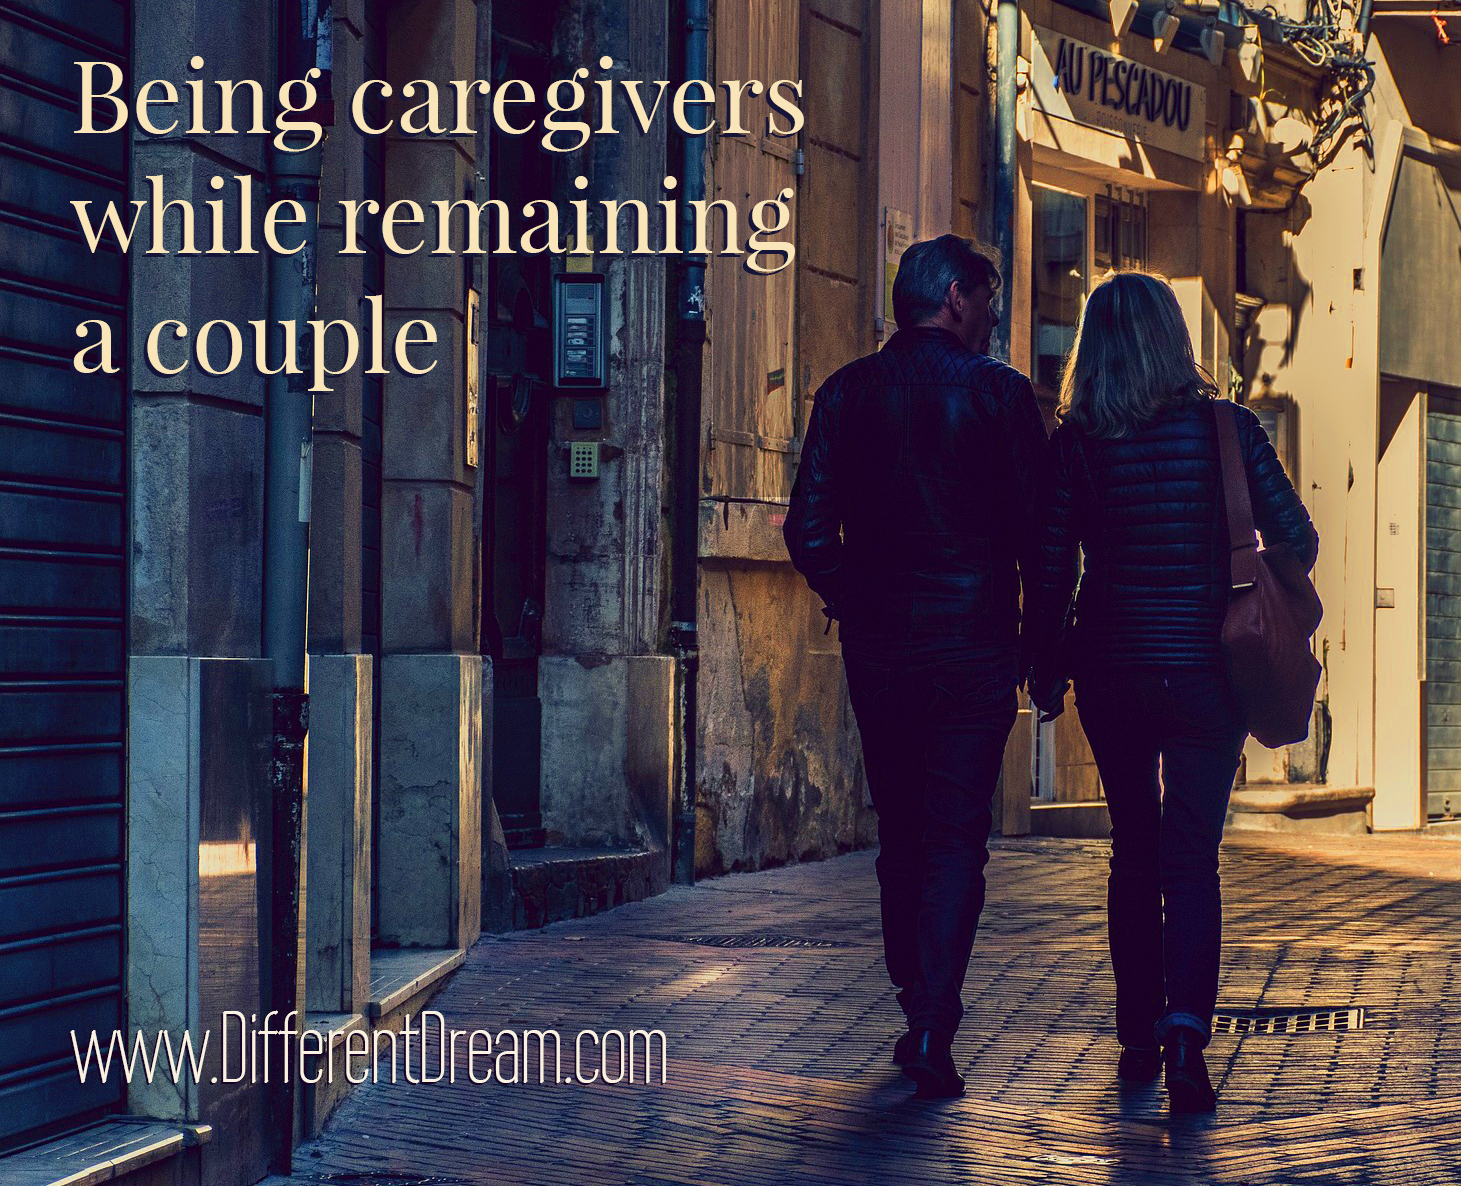 Guest blogger Heather Braucher explains how caregiving spouses are for each other in the midst of juggling parenting and special needs.